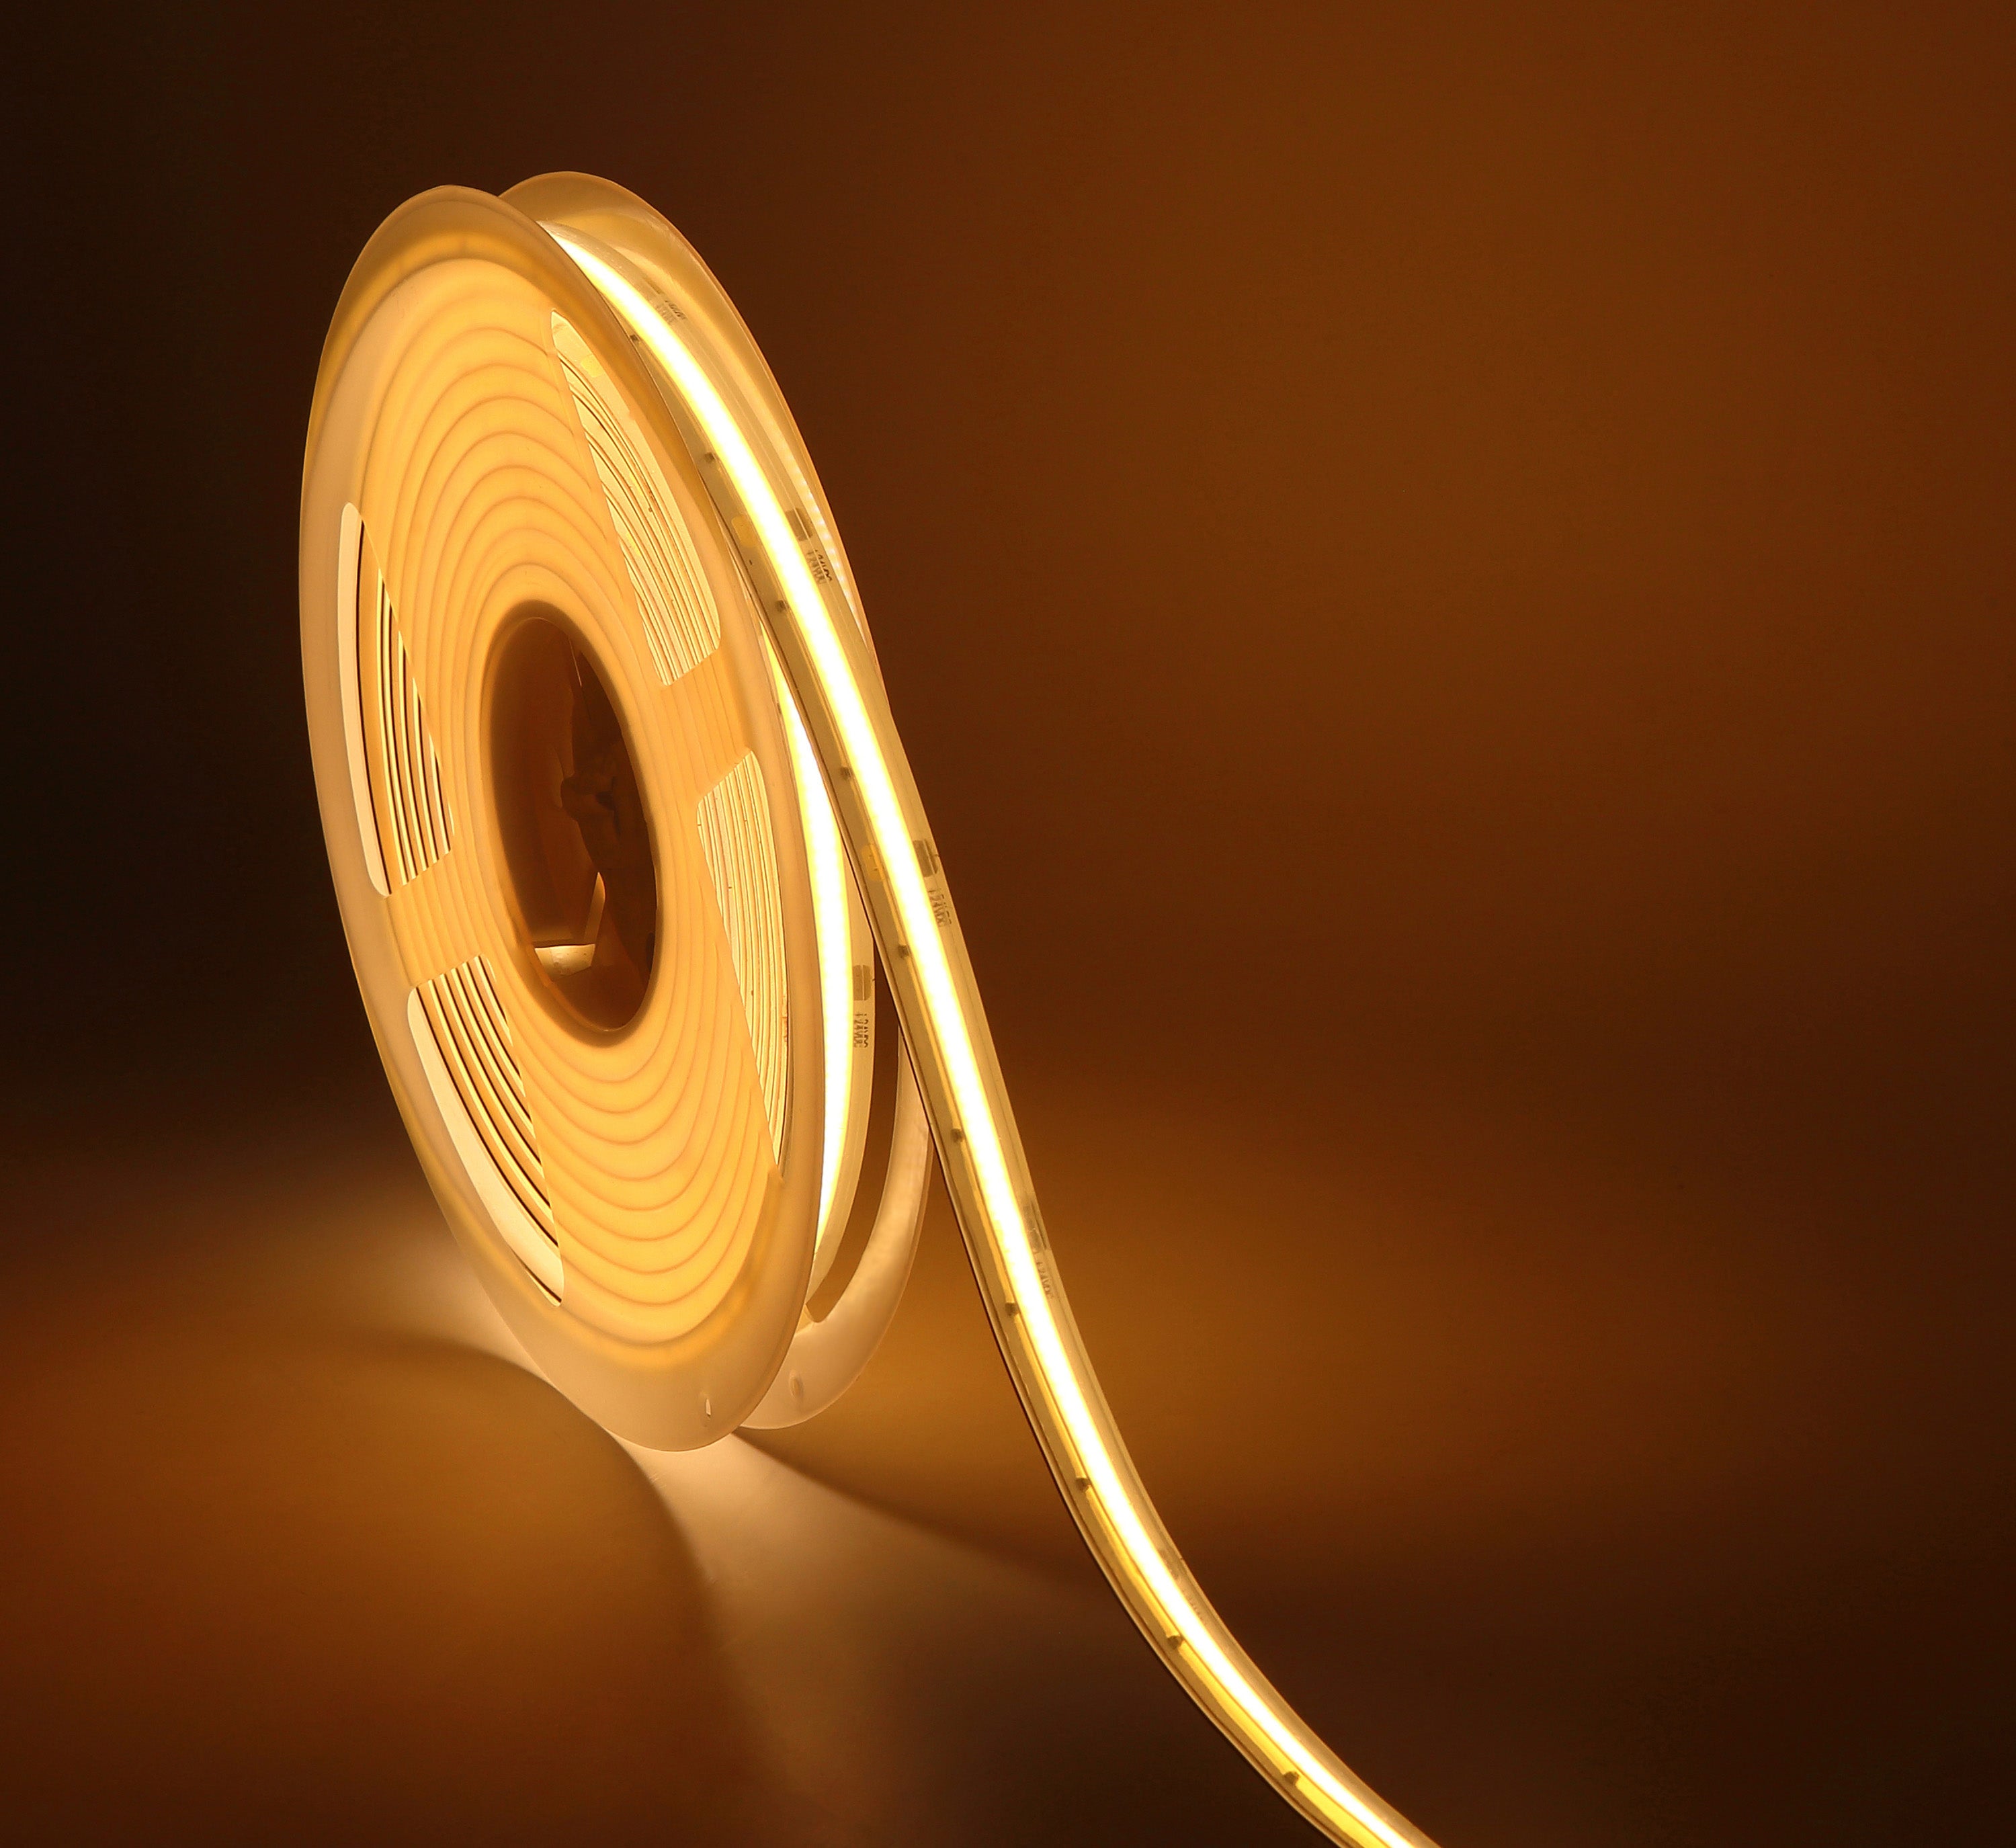 A square-shaped image of a single strip of LED tape light curled loosely in the center against a dark background, emitting a warm golden glow that reflects off the surface beneath it.